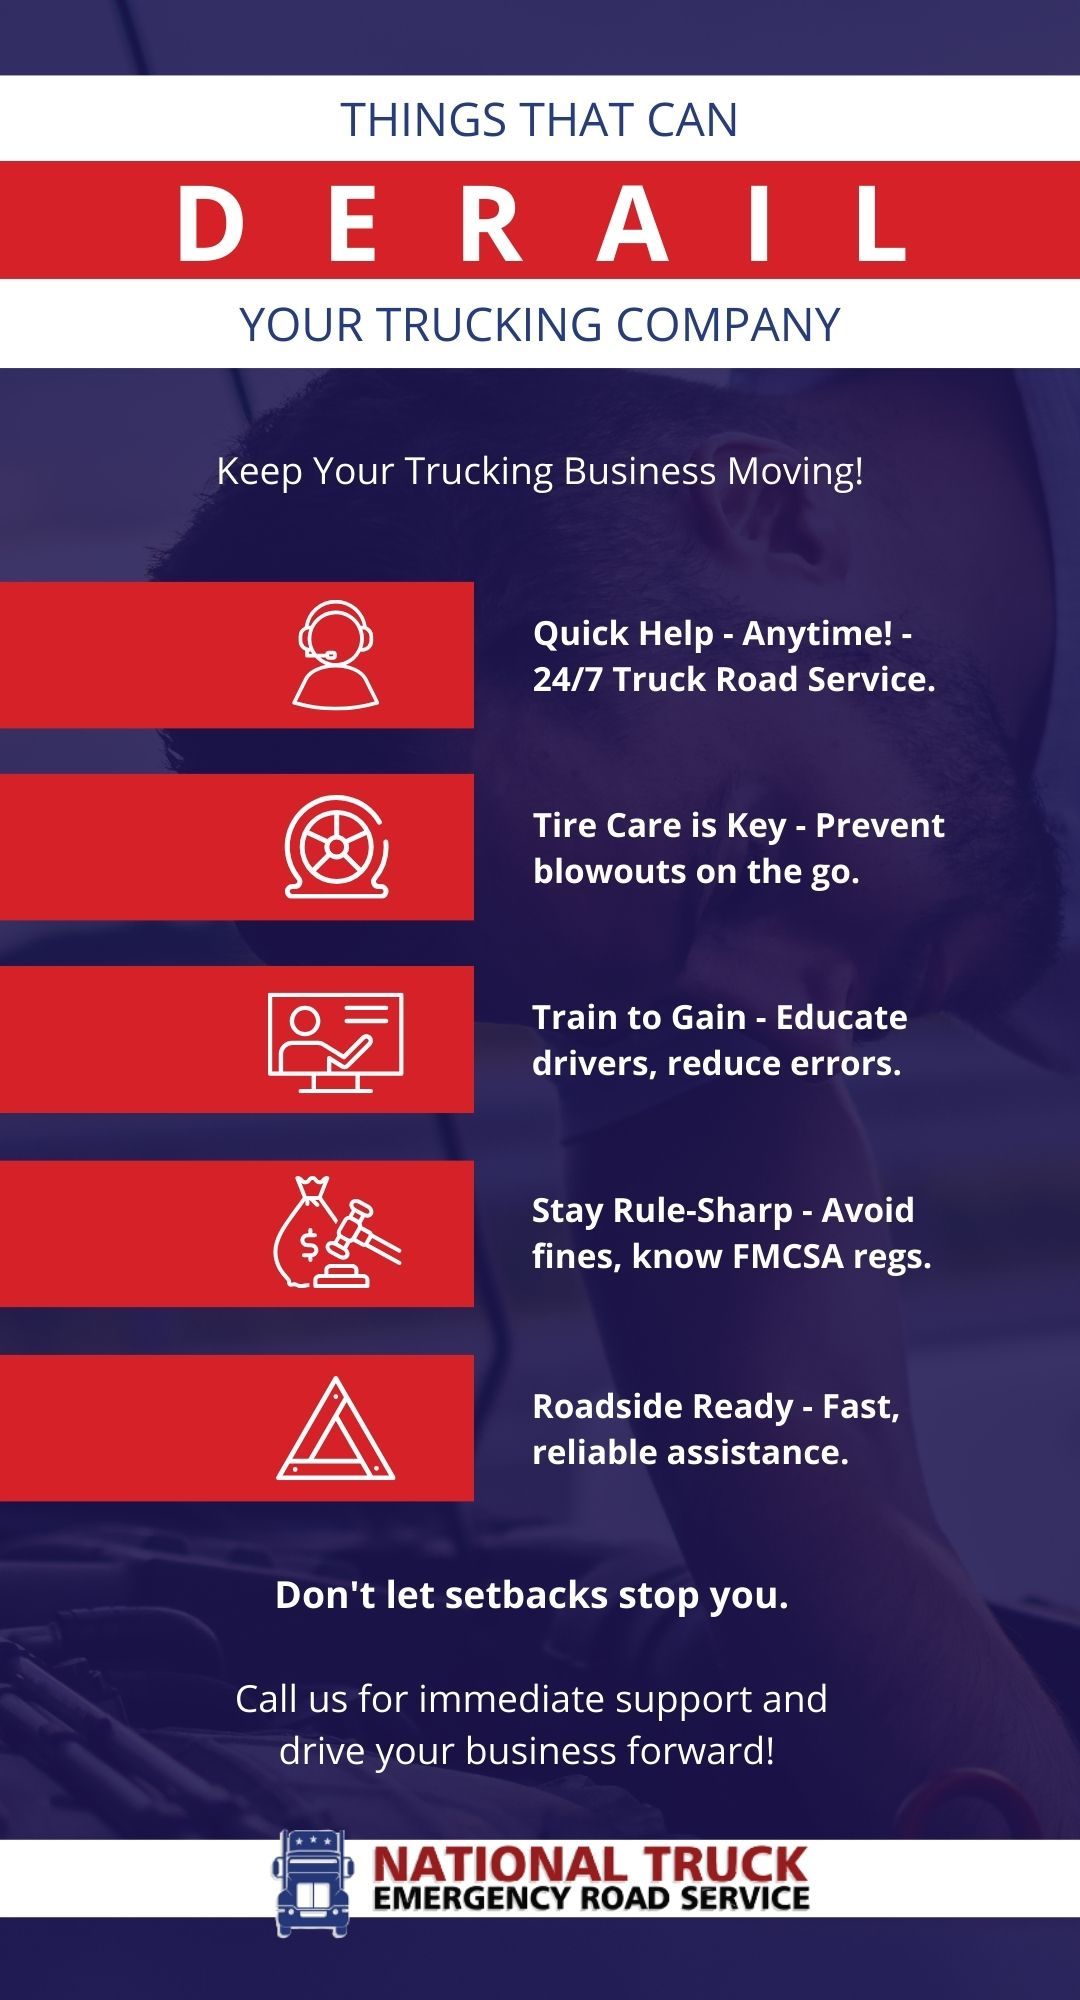 M12036 - Infographic- Things That Can Derail Your Trucking Company.jpg